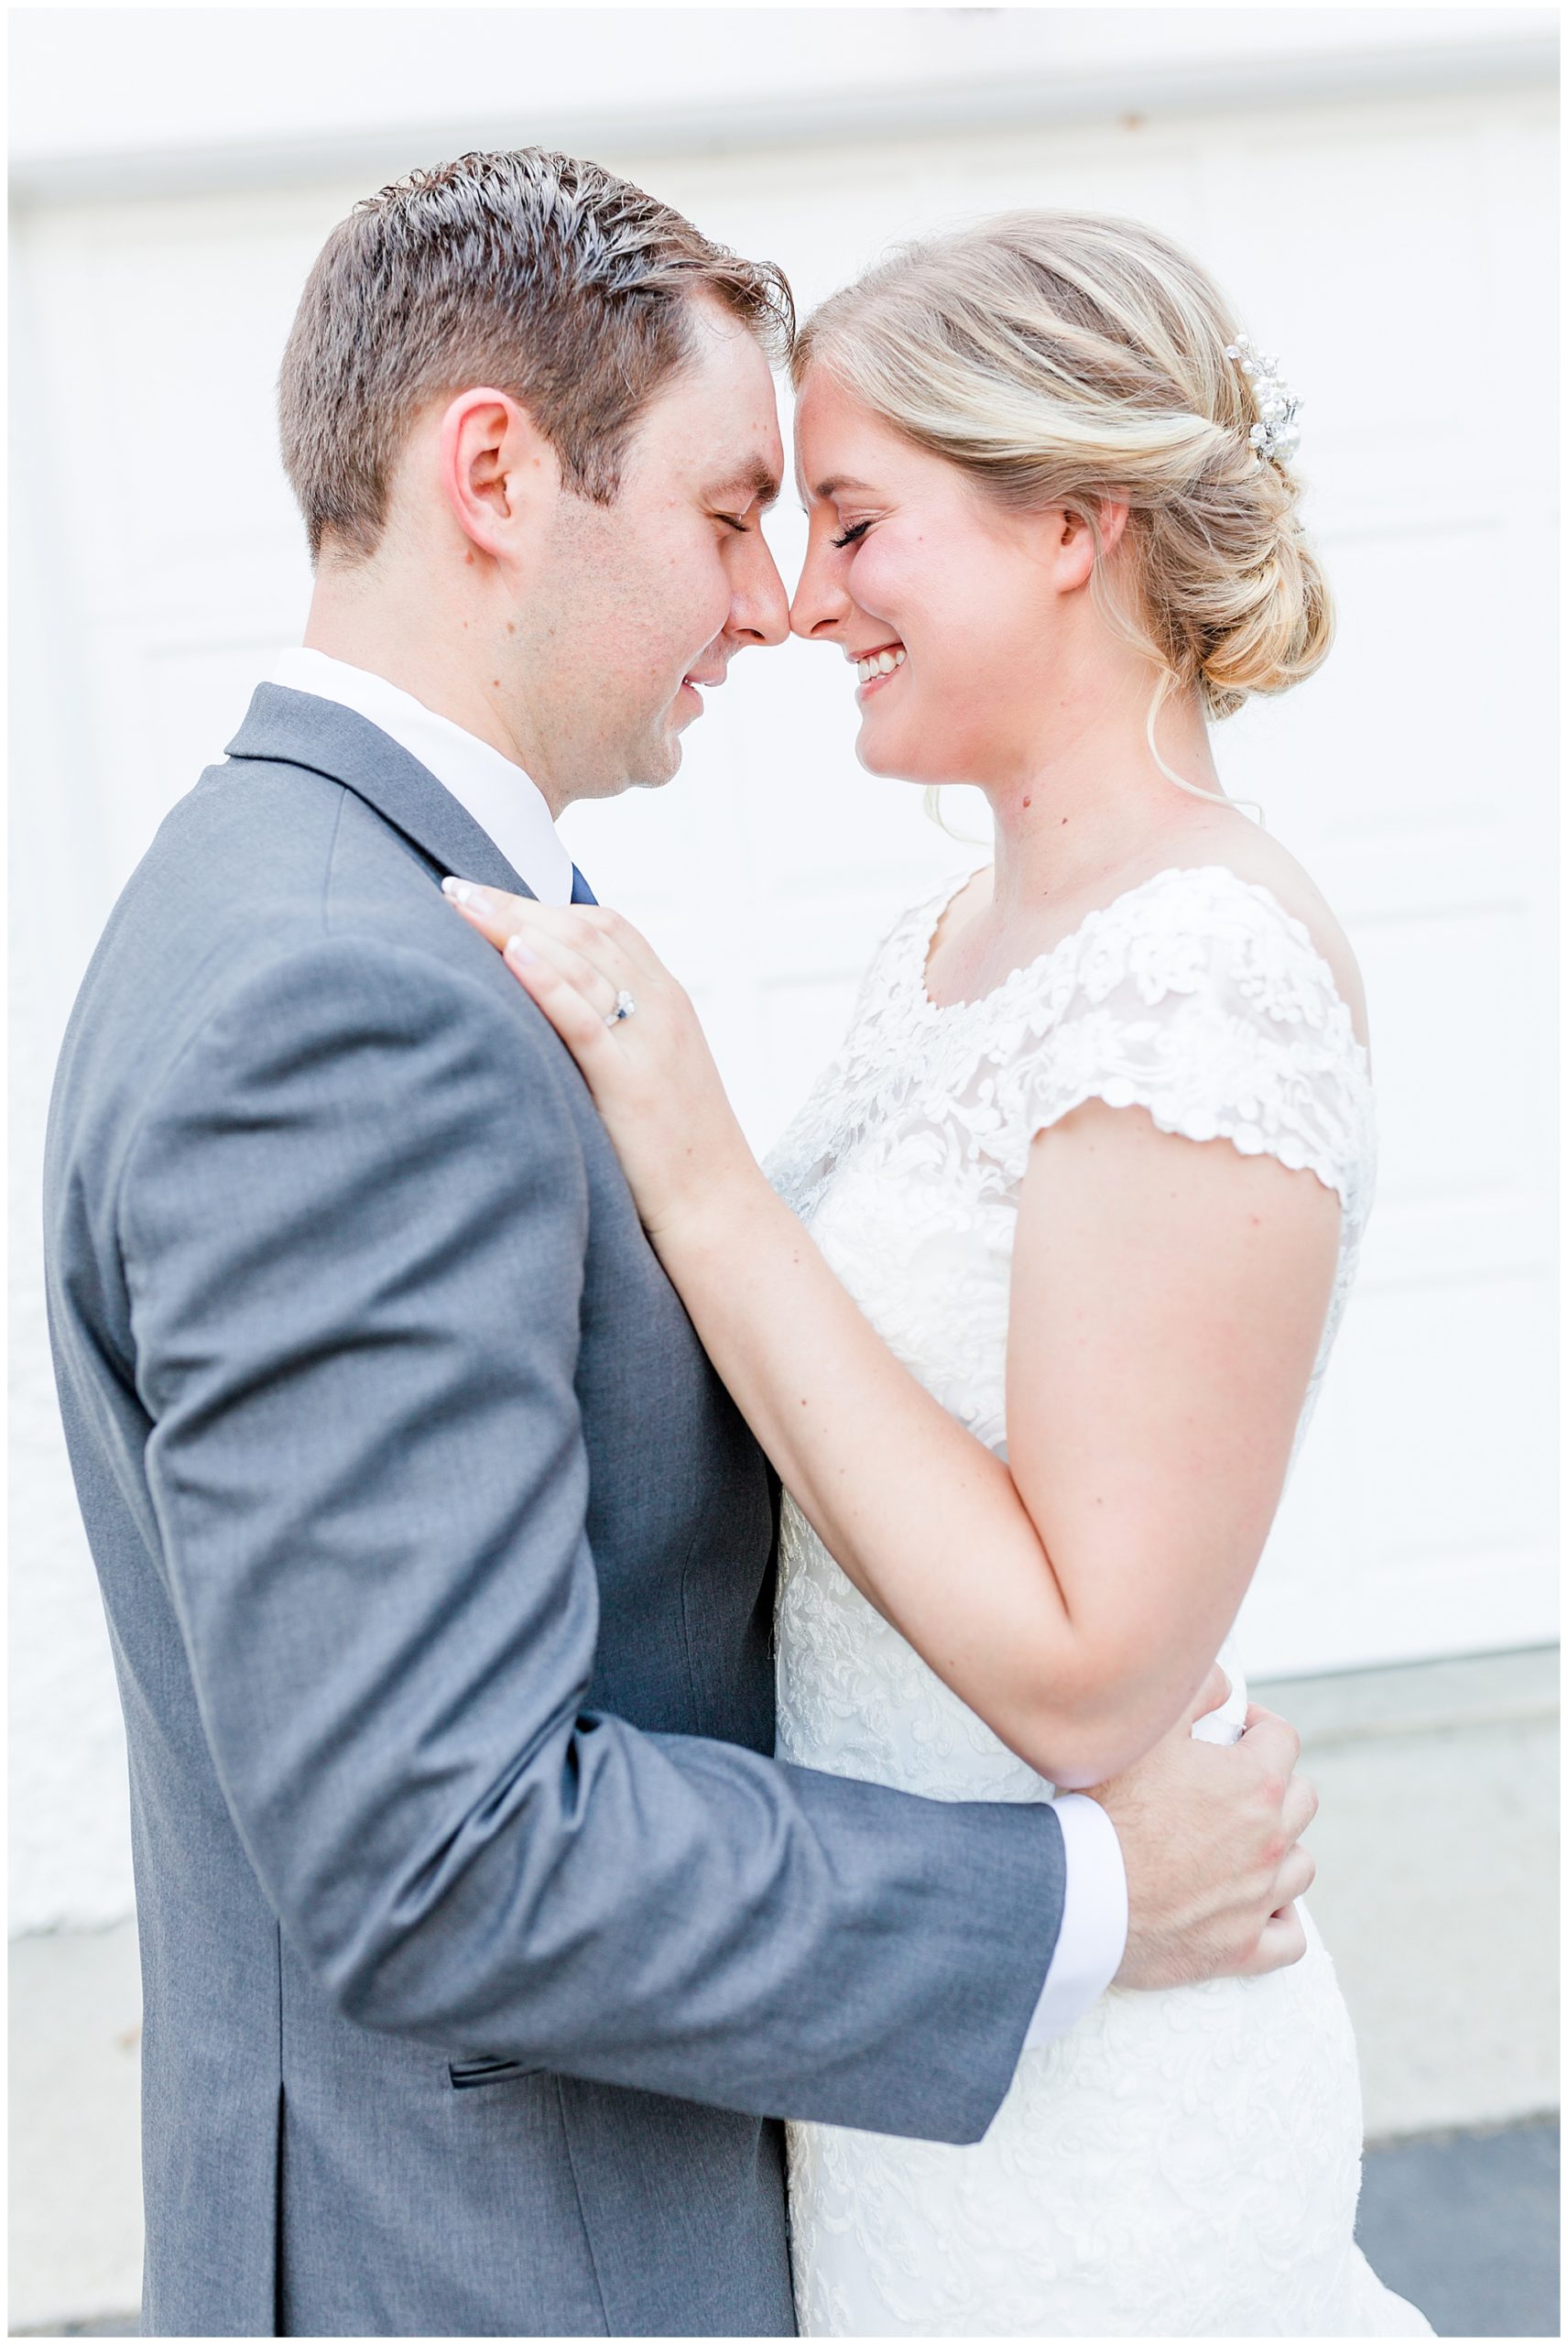 first look benefits, first look, wedding day first look, wedding day moments, wedding day, wedding day timeline ideas, first look ideas, wedding day tips, wedding tips, wedding timeline tips, make your wedding day great, relationship goals, Rachel E.H. Photography, romantic portraits